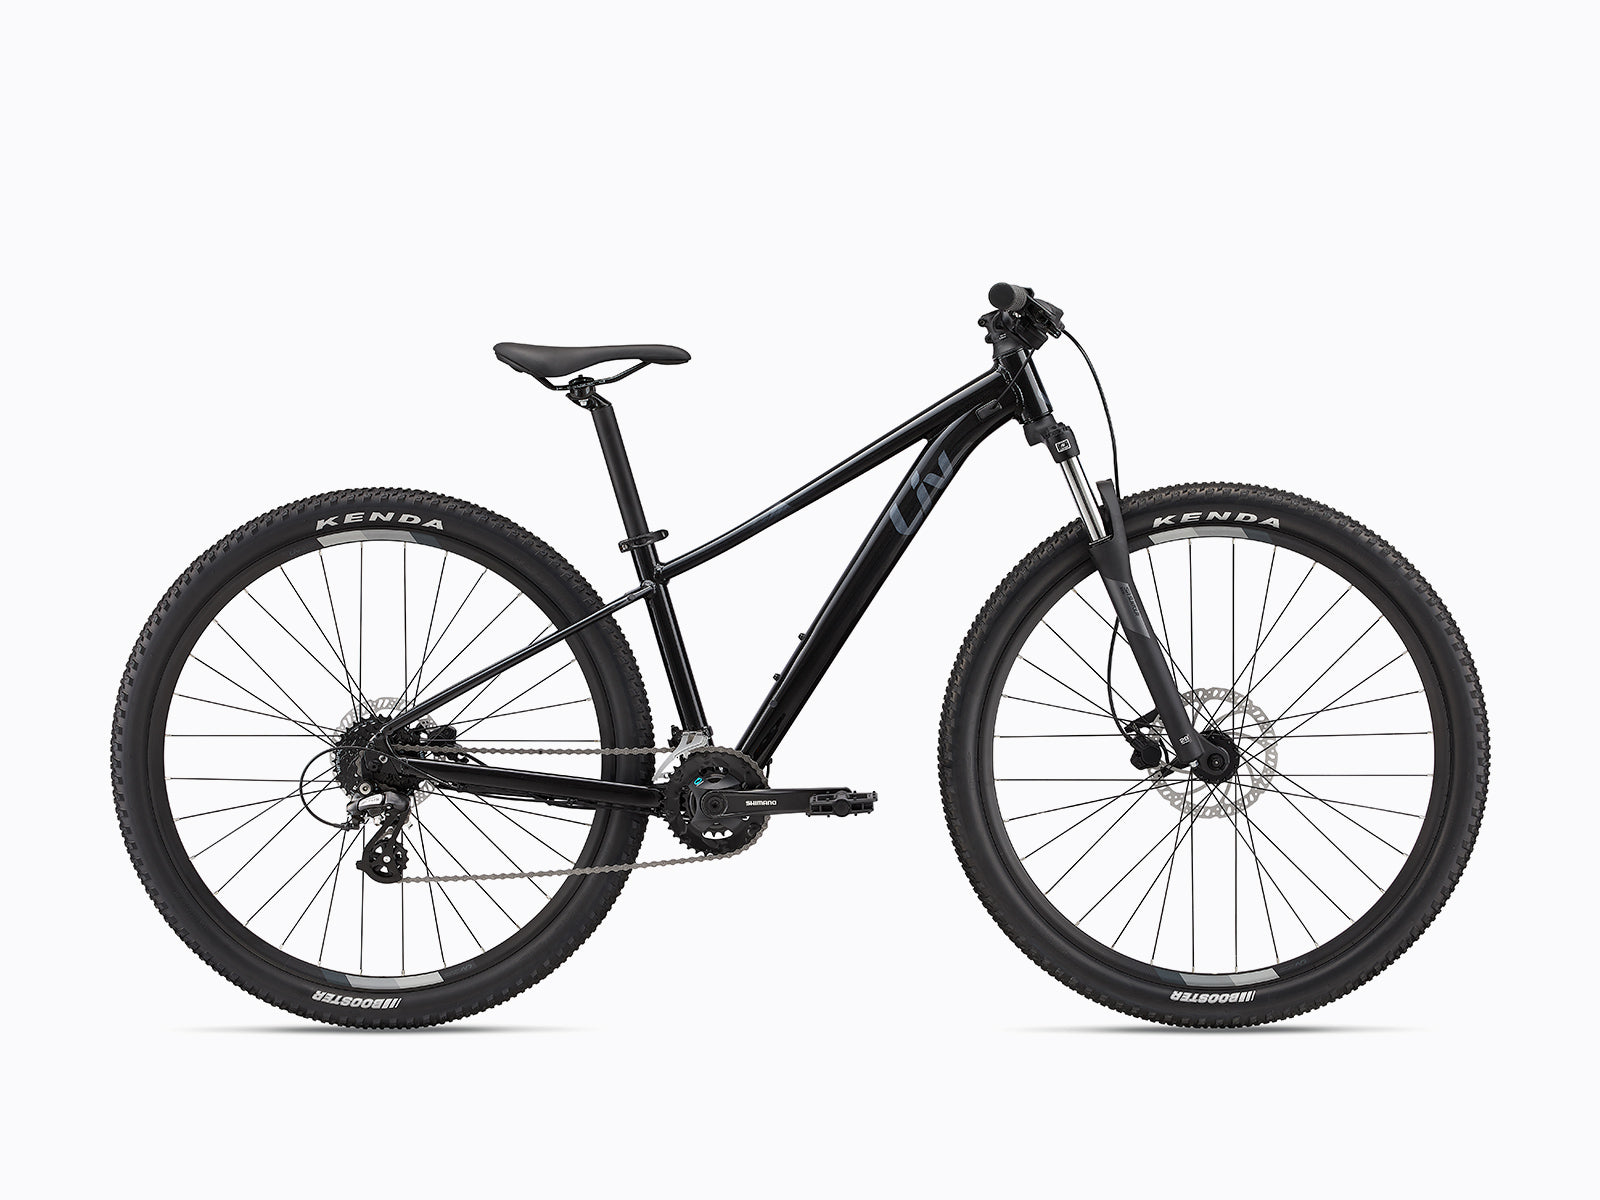 image features a Liv tempt 29; a women's mountain bike designed for girls to ride dirt trails